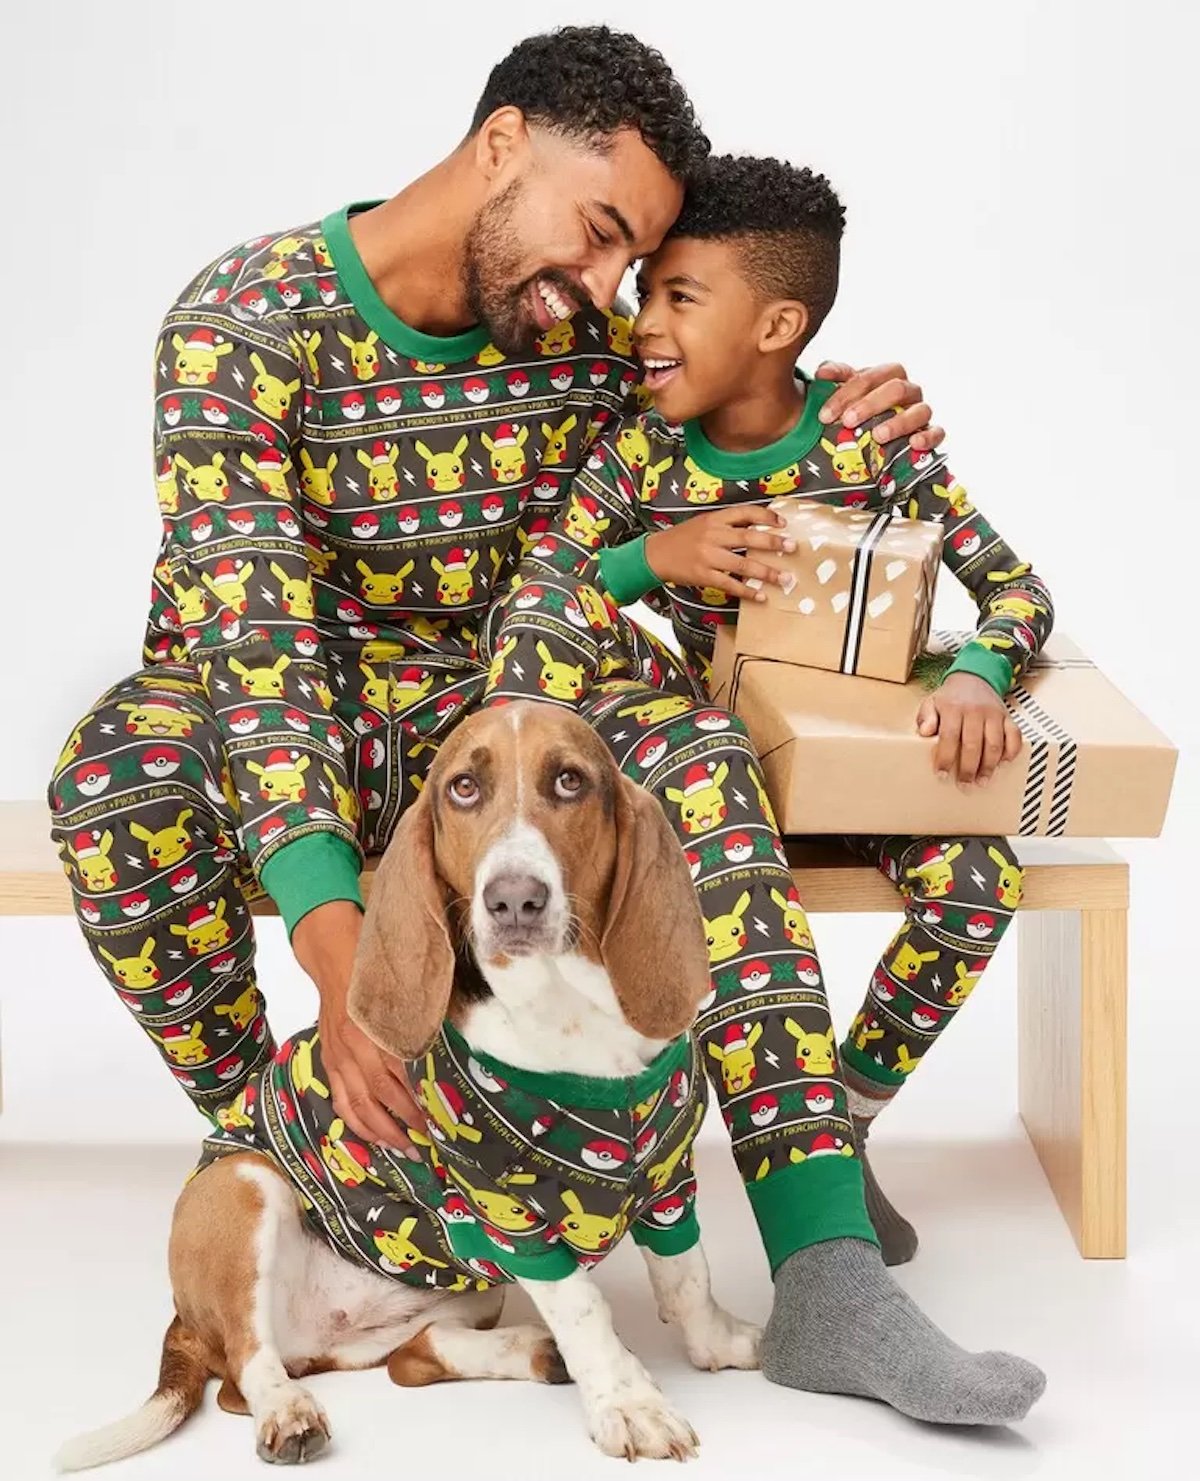 A father, son, and dog in matching Pokemon long john pajamas from Hanna Andersson